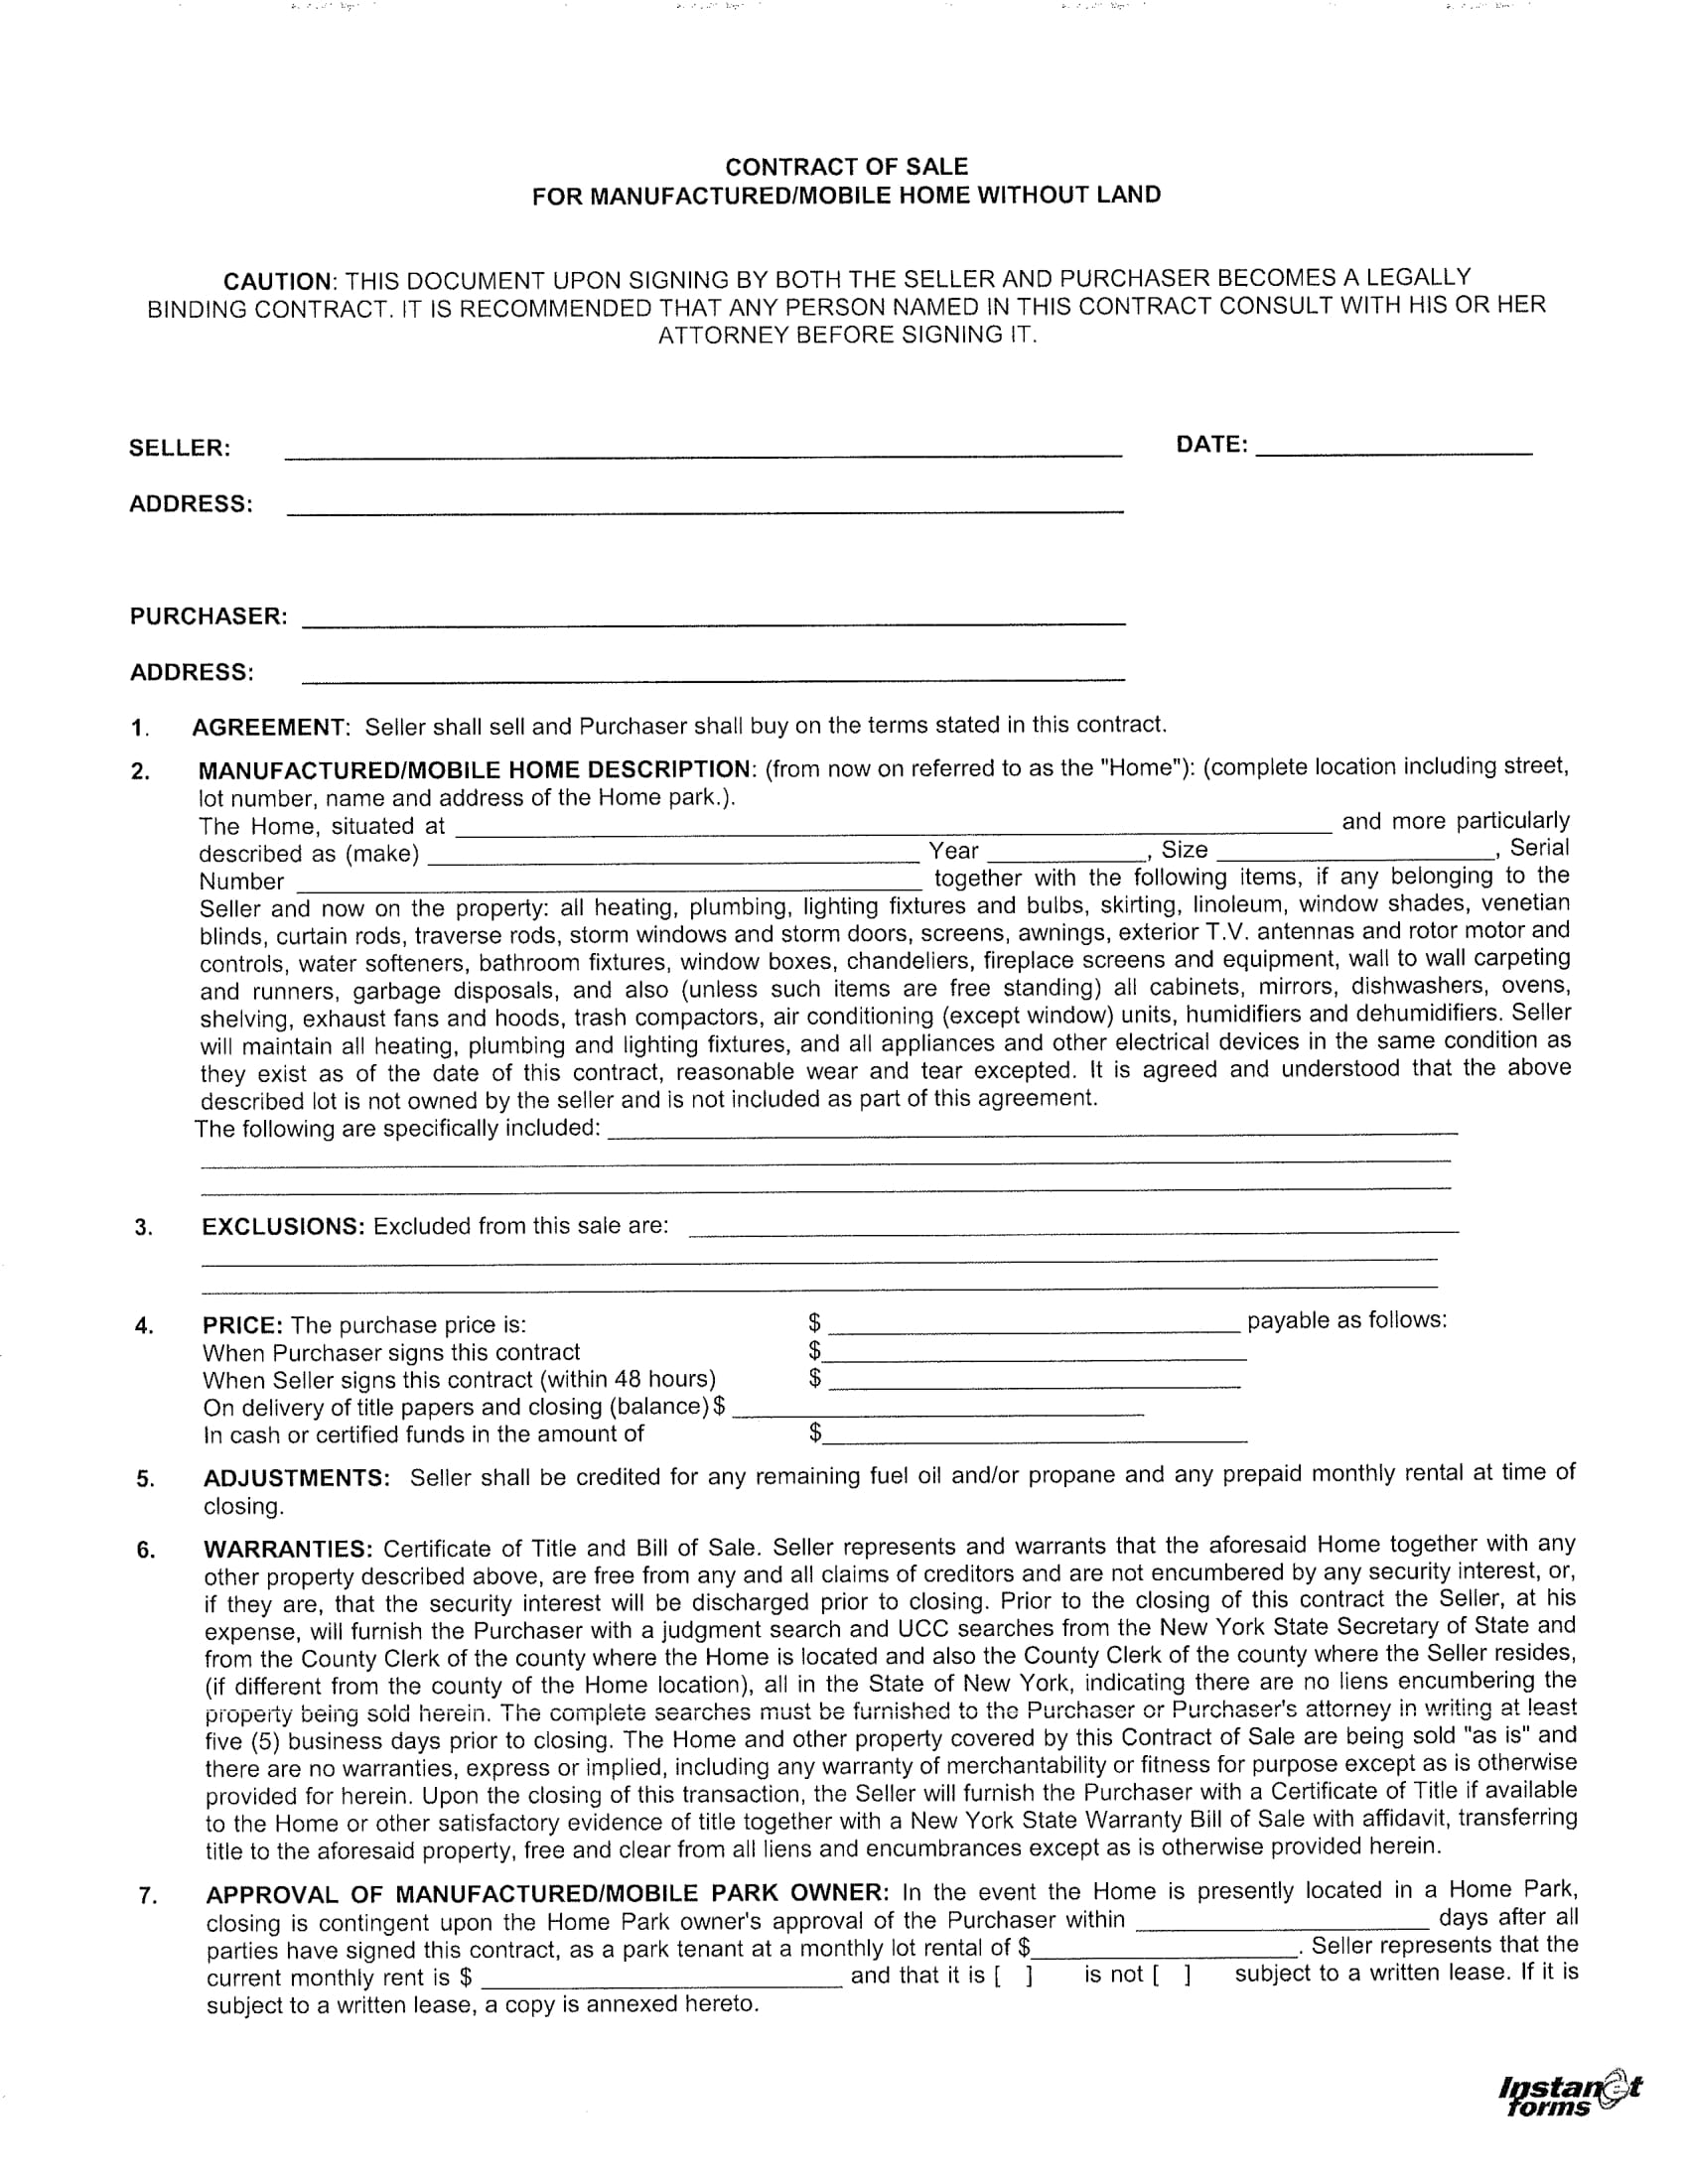 Mobile Home Purchase Agreement Template